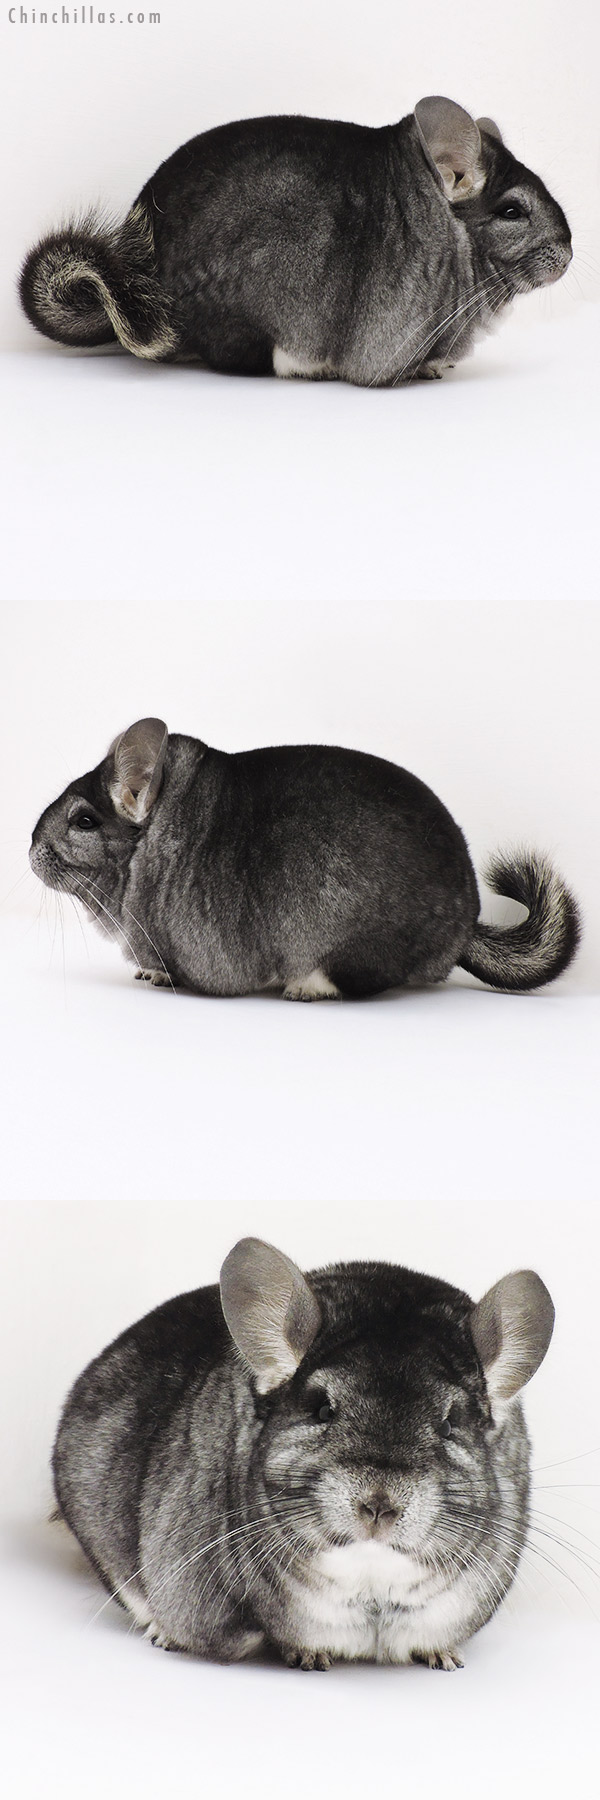 Chinchilla or related item offered for sale or export on Chinchillas.com - 16296 Extra Large Blocky Premium Production Quality Standard Female Chinchilla